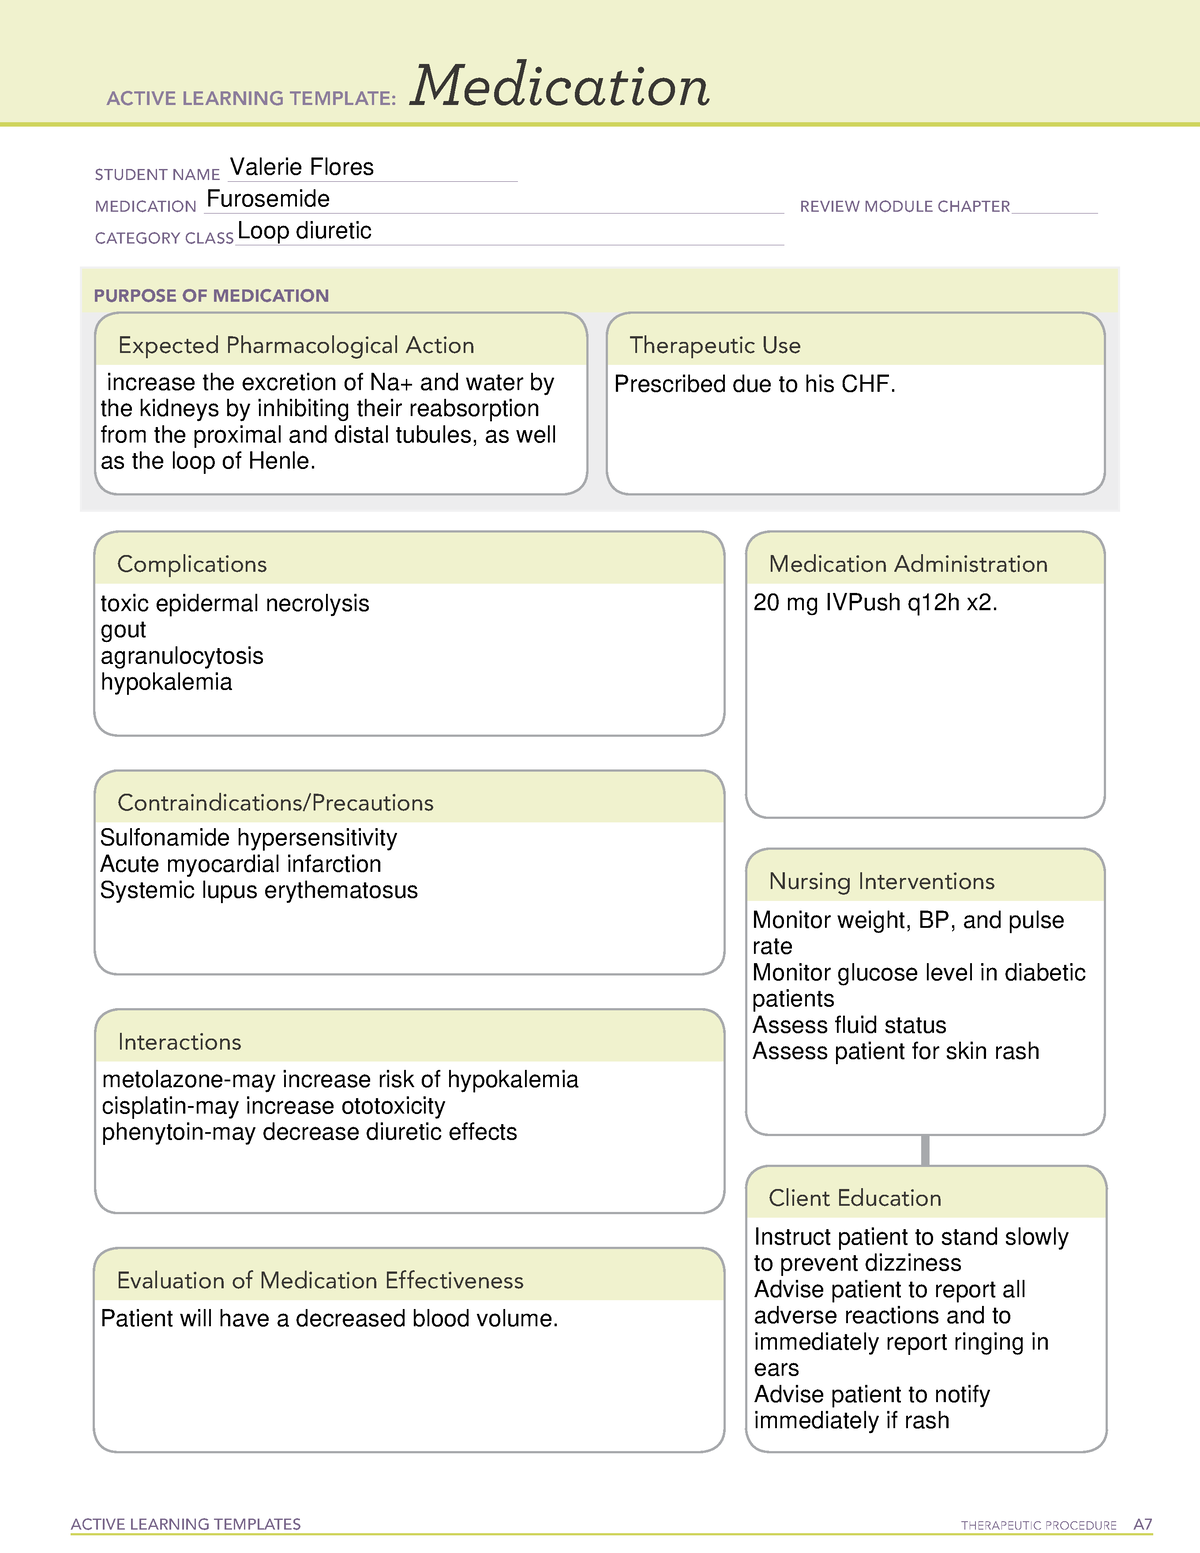 ati-med-form-furosemide-active-learning-templates-therapeutic